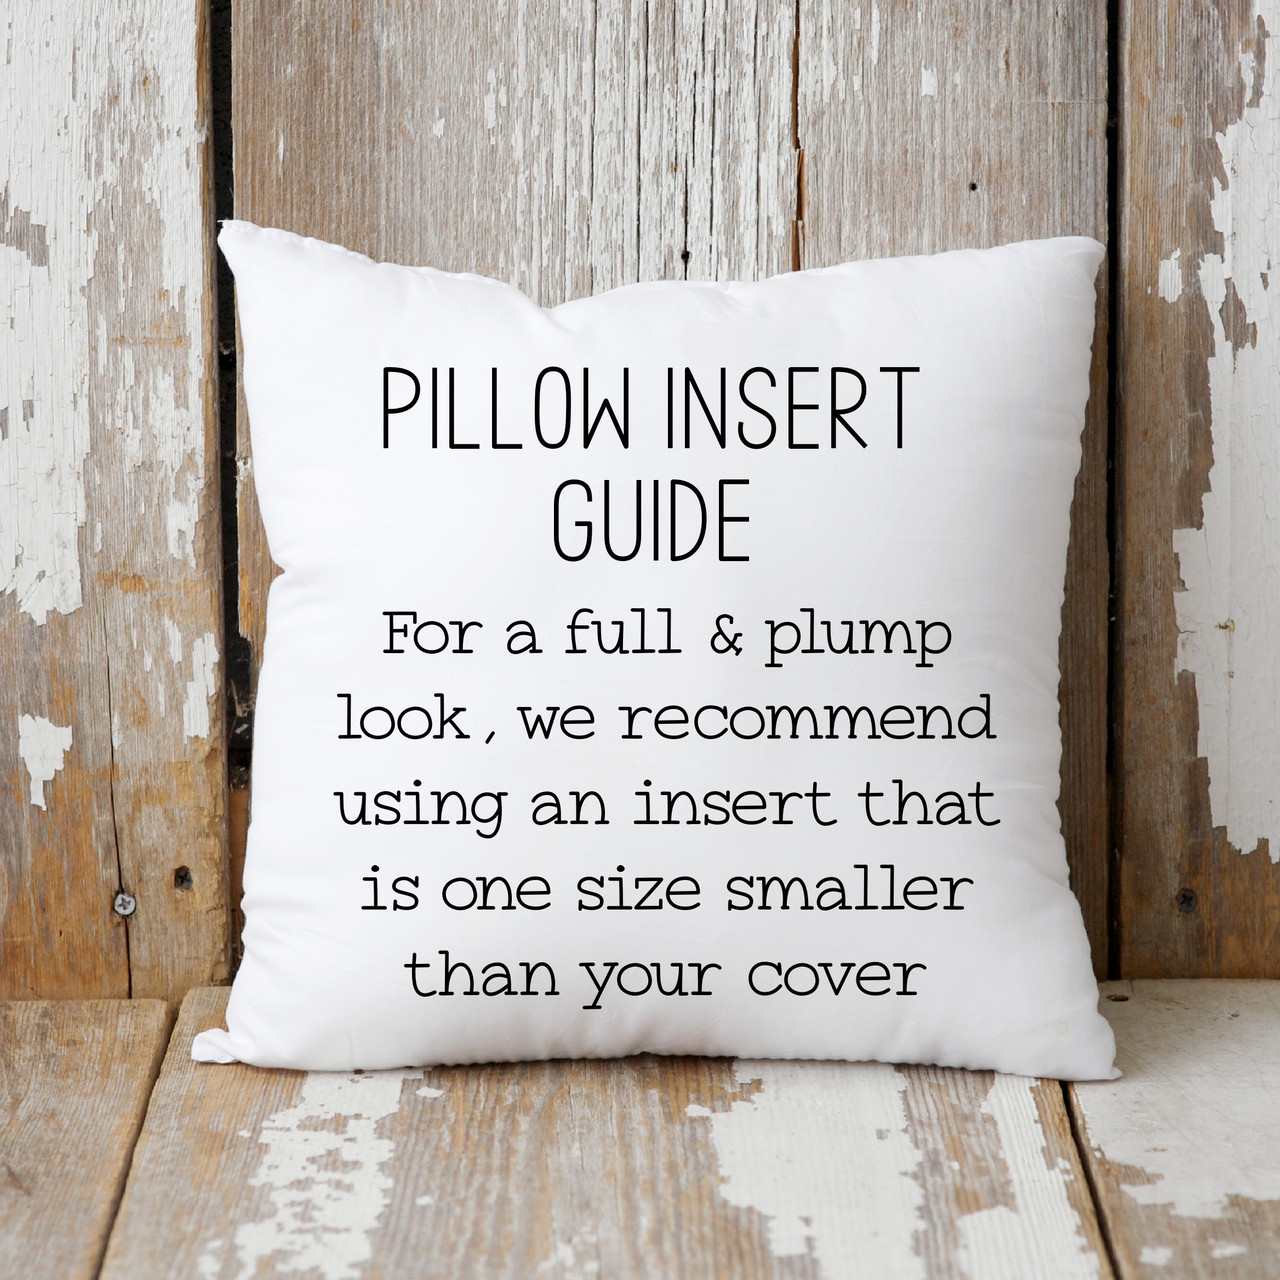 https://cdn11.bigcommerce.com/s-t5i1z/images/stencil/1280x1280/products/5395/15135/Info_-_white_pillow_cover_1__06882.1700056352.jpg?c=2?imbypass=on